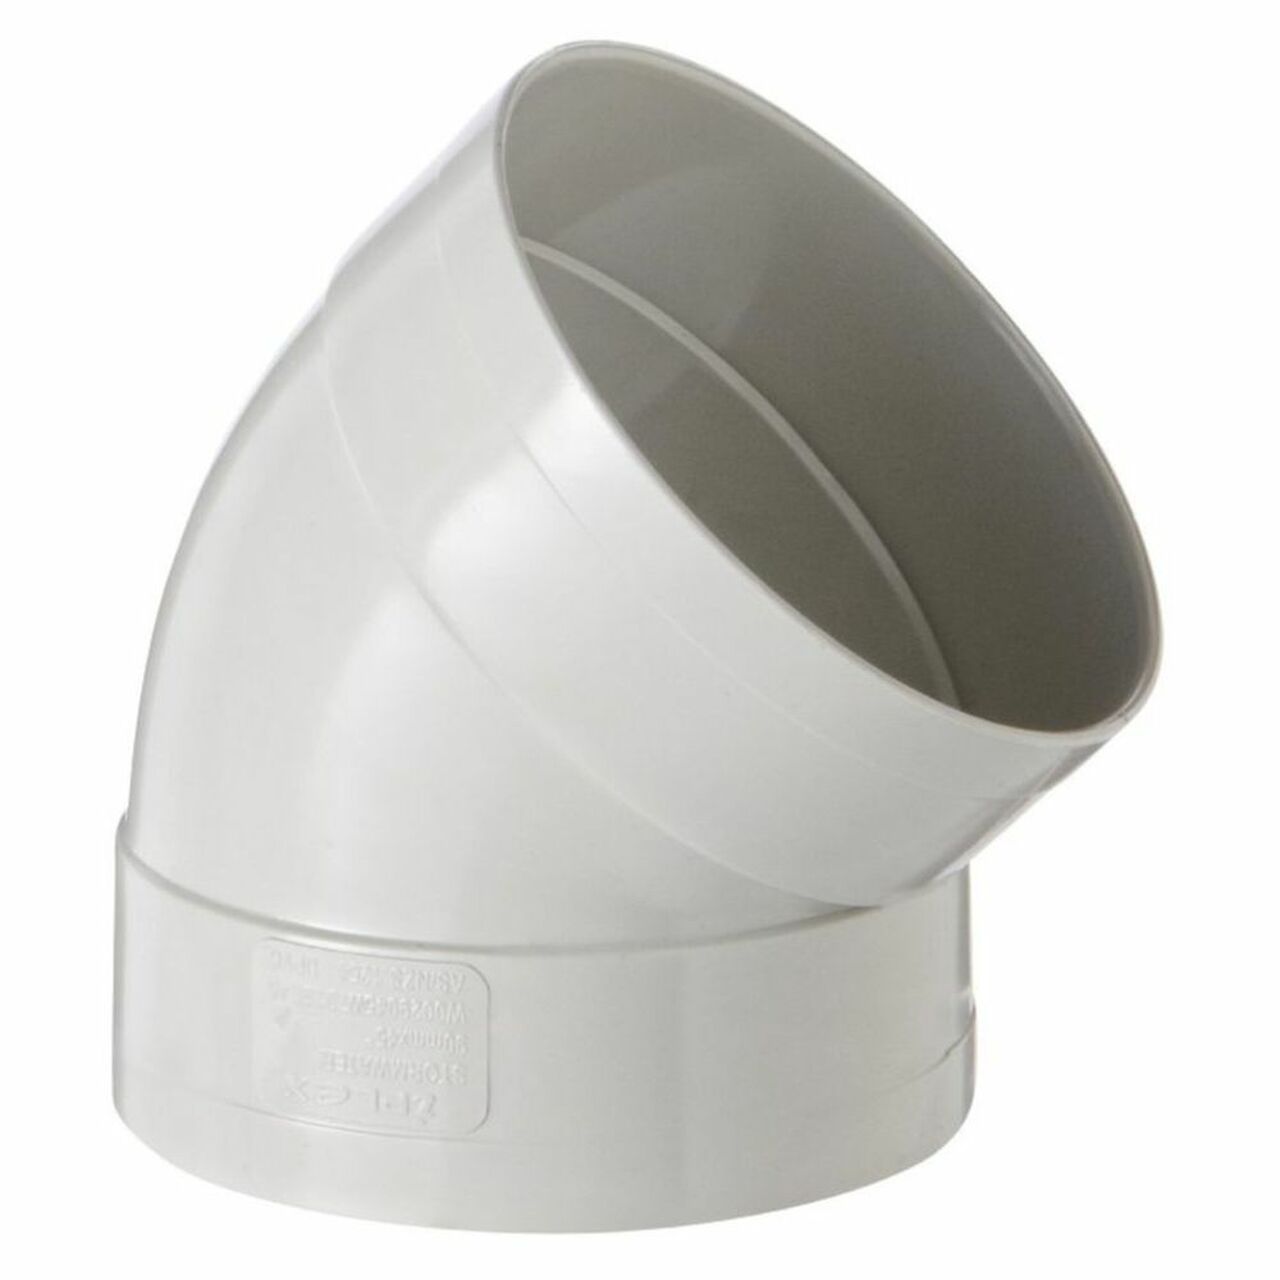 Holman 45 Degrees F&F PVC Stormwater Elbow 90mm SWF0460 - Double Bay Hardware